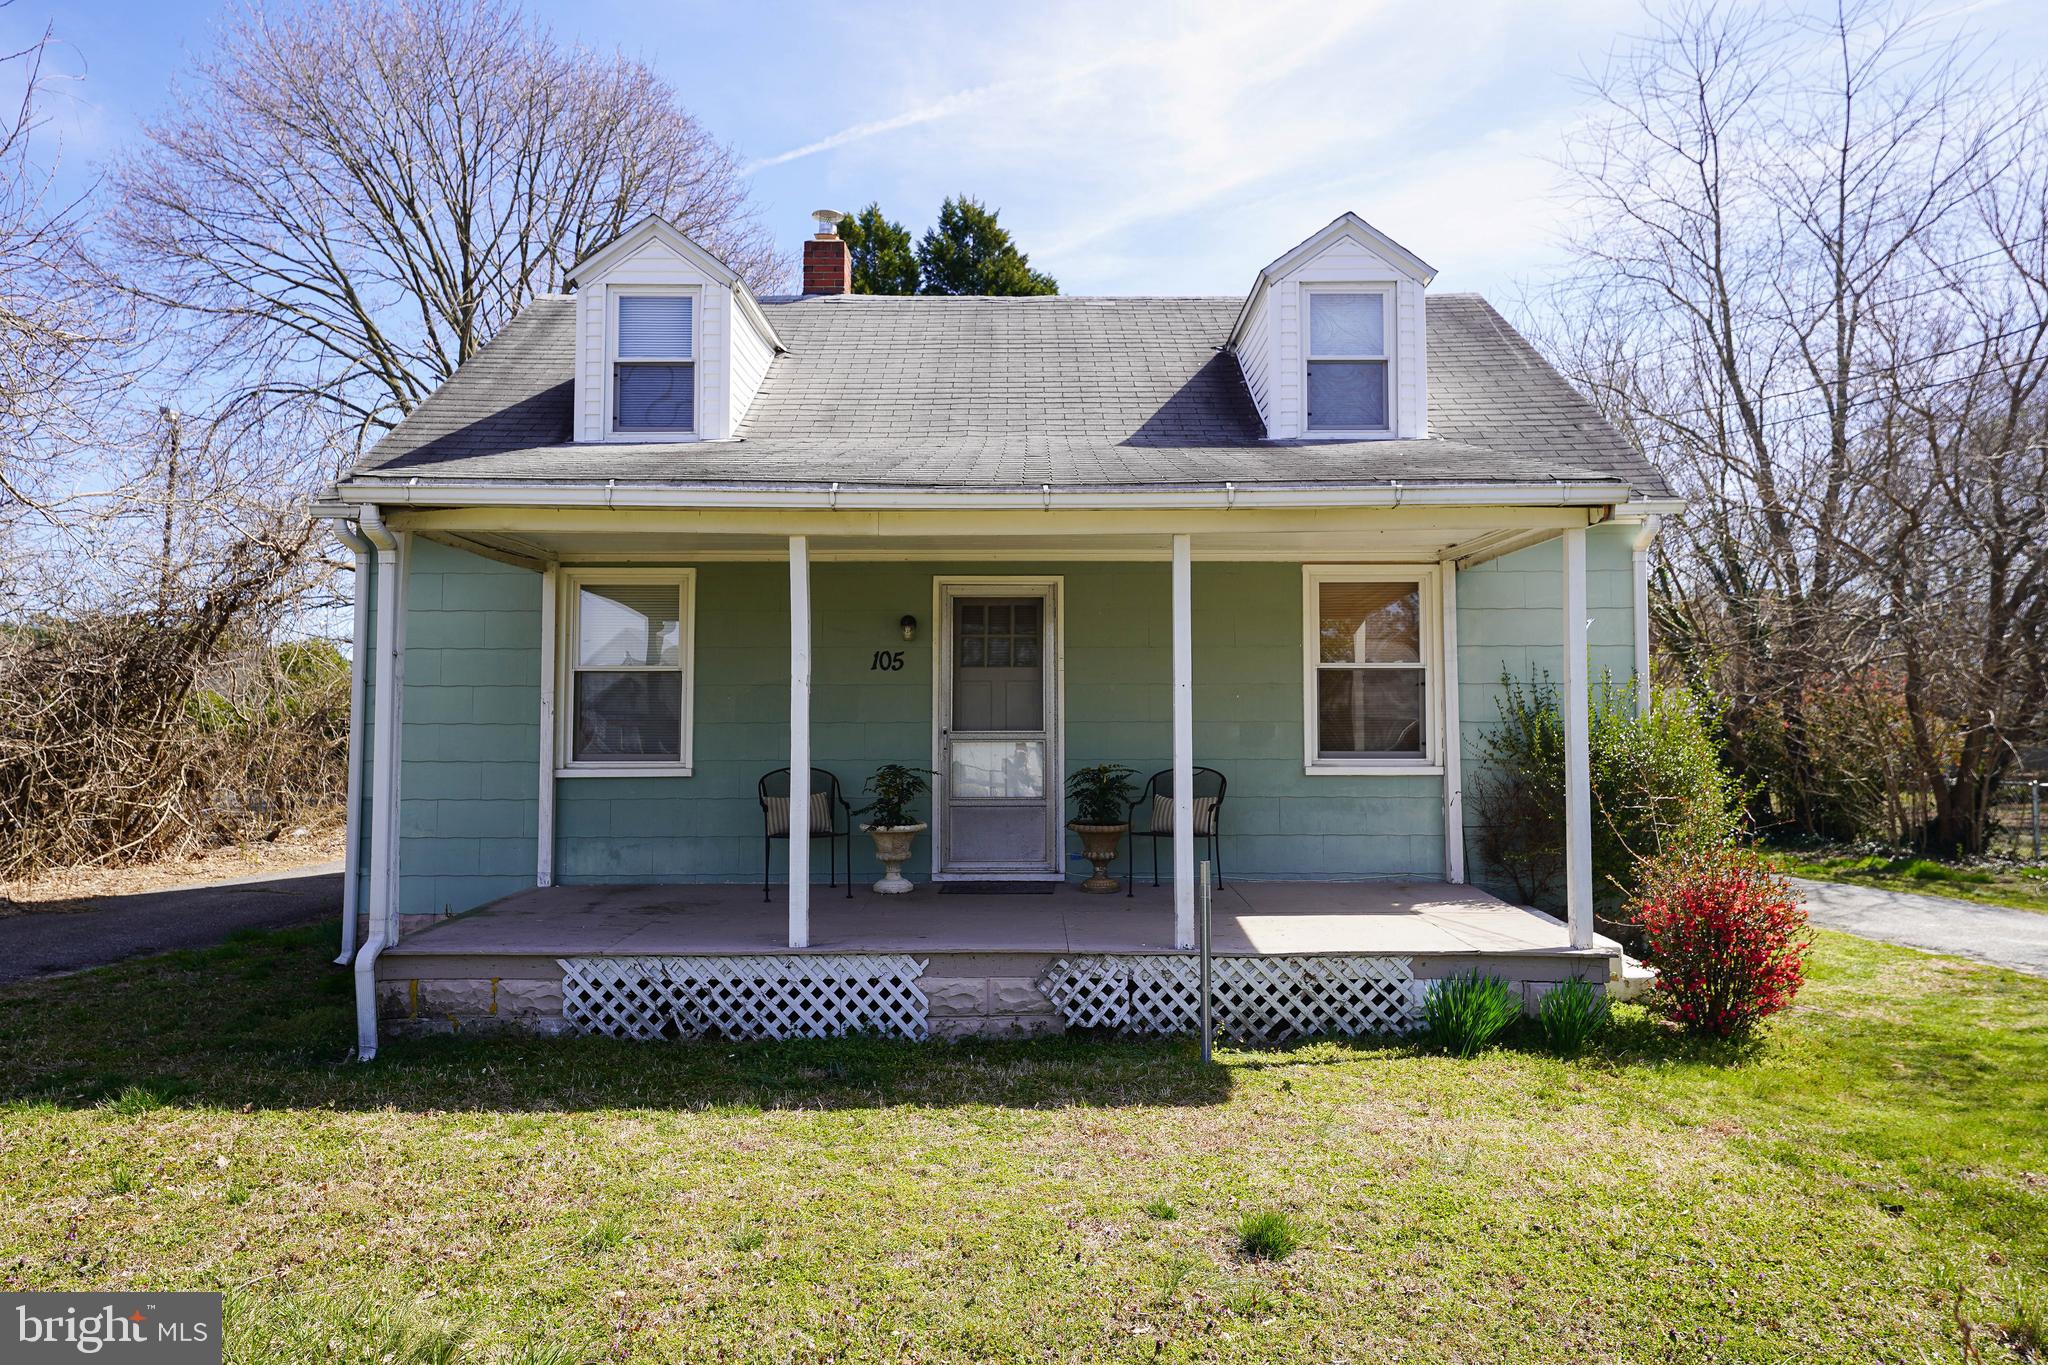 Cute and affordable 4BR/1BA Cape on Salisbury's east-side. Only 30mi to Ocean City and close to ever